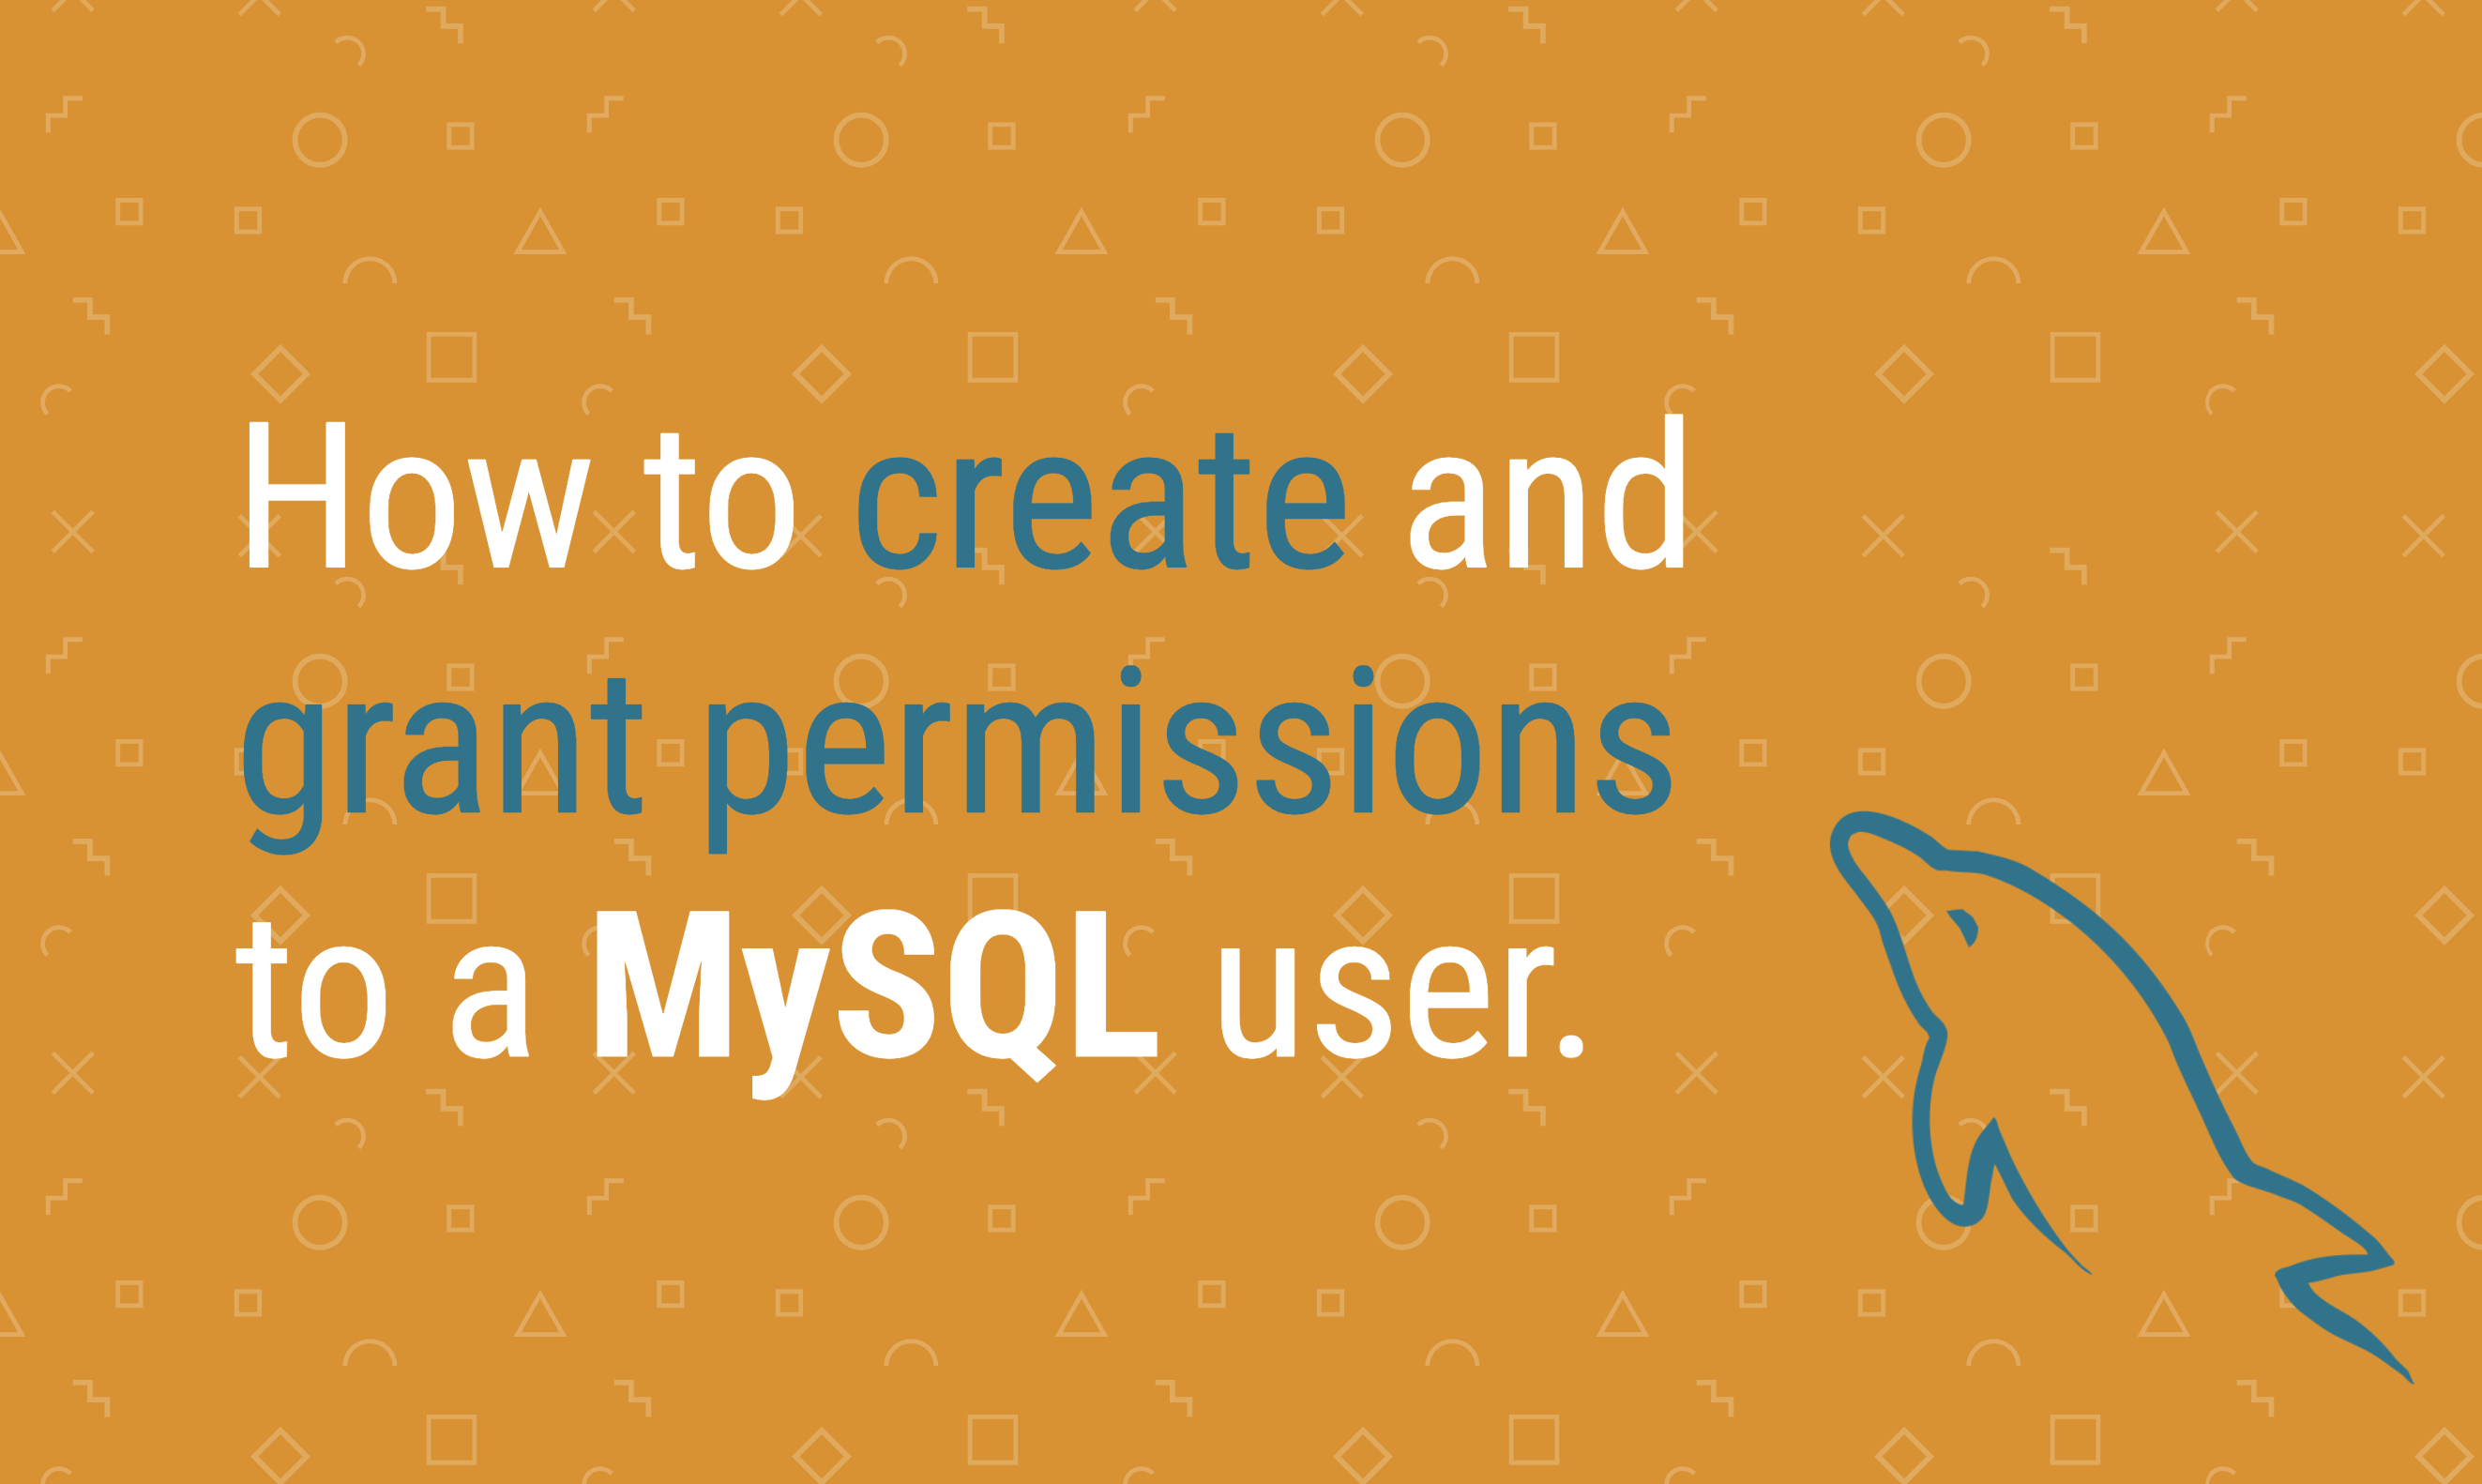 How to create and grant permissions to a MySQL user